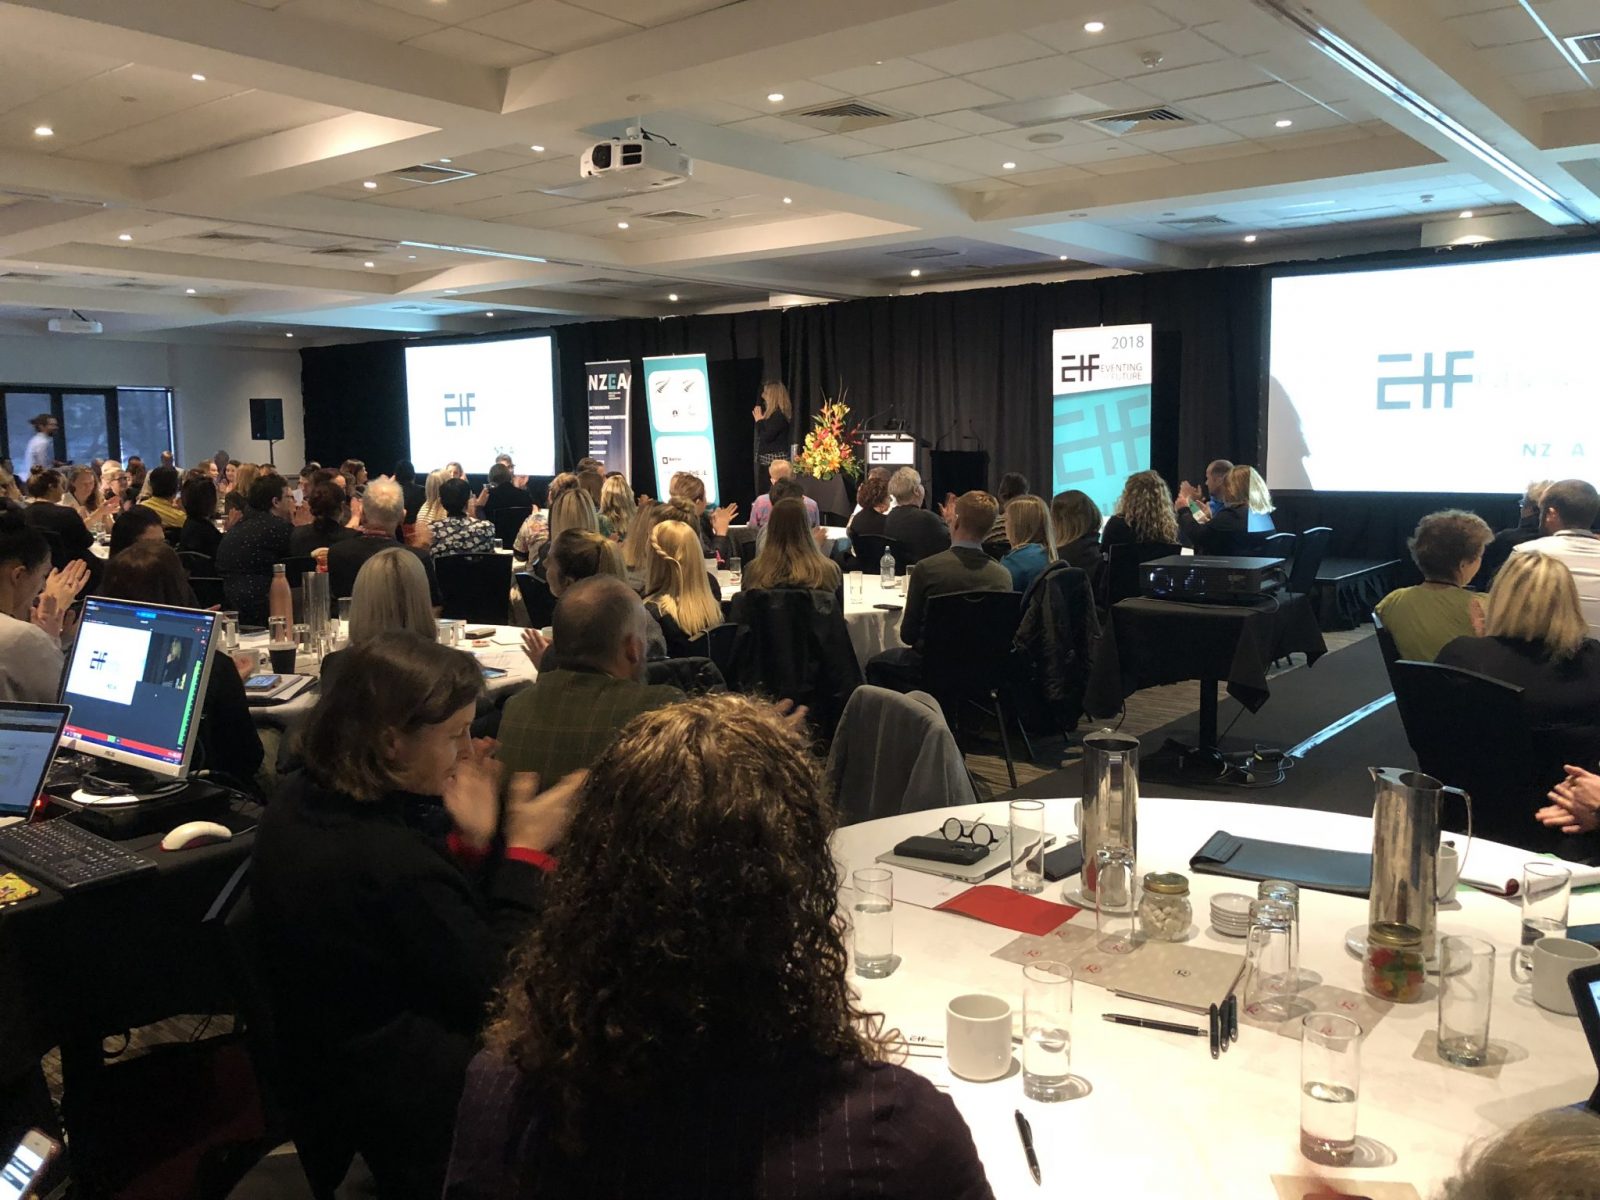 AudienceAlive presents at Eventing the Future Conference in Christchurch on 6th & 7th August 2018